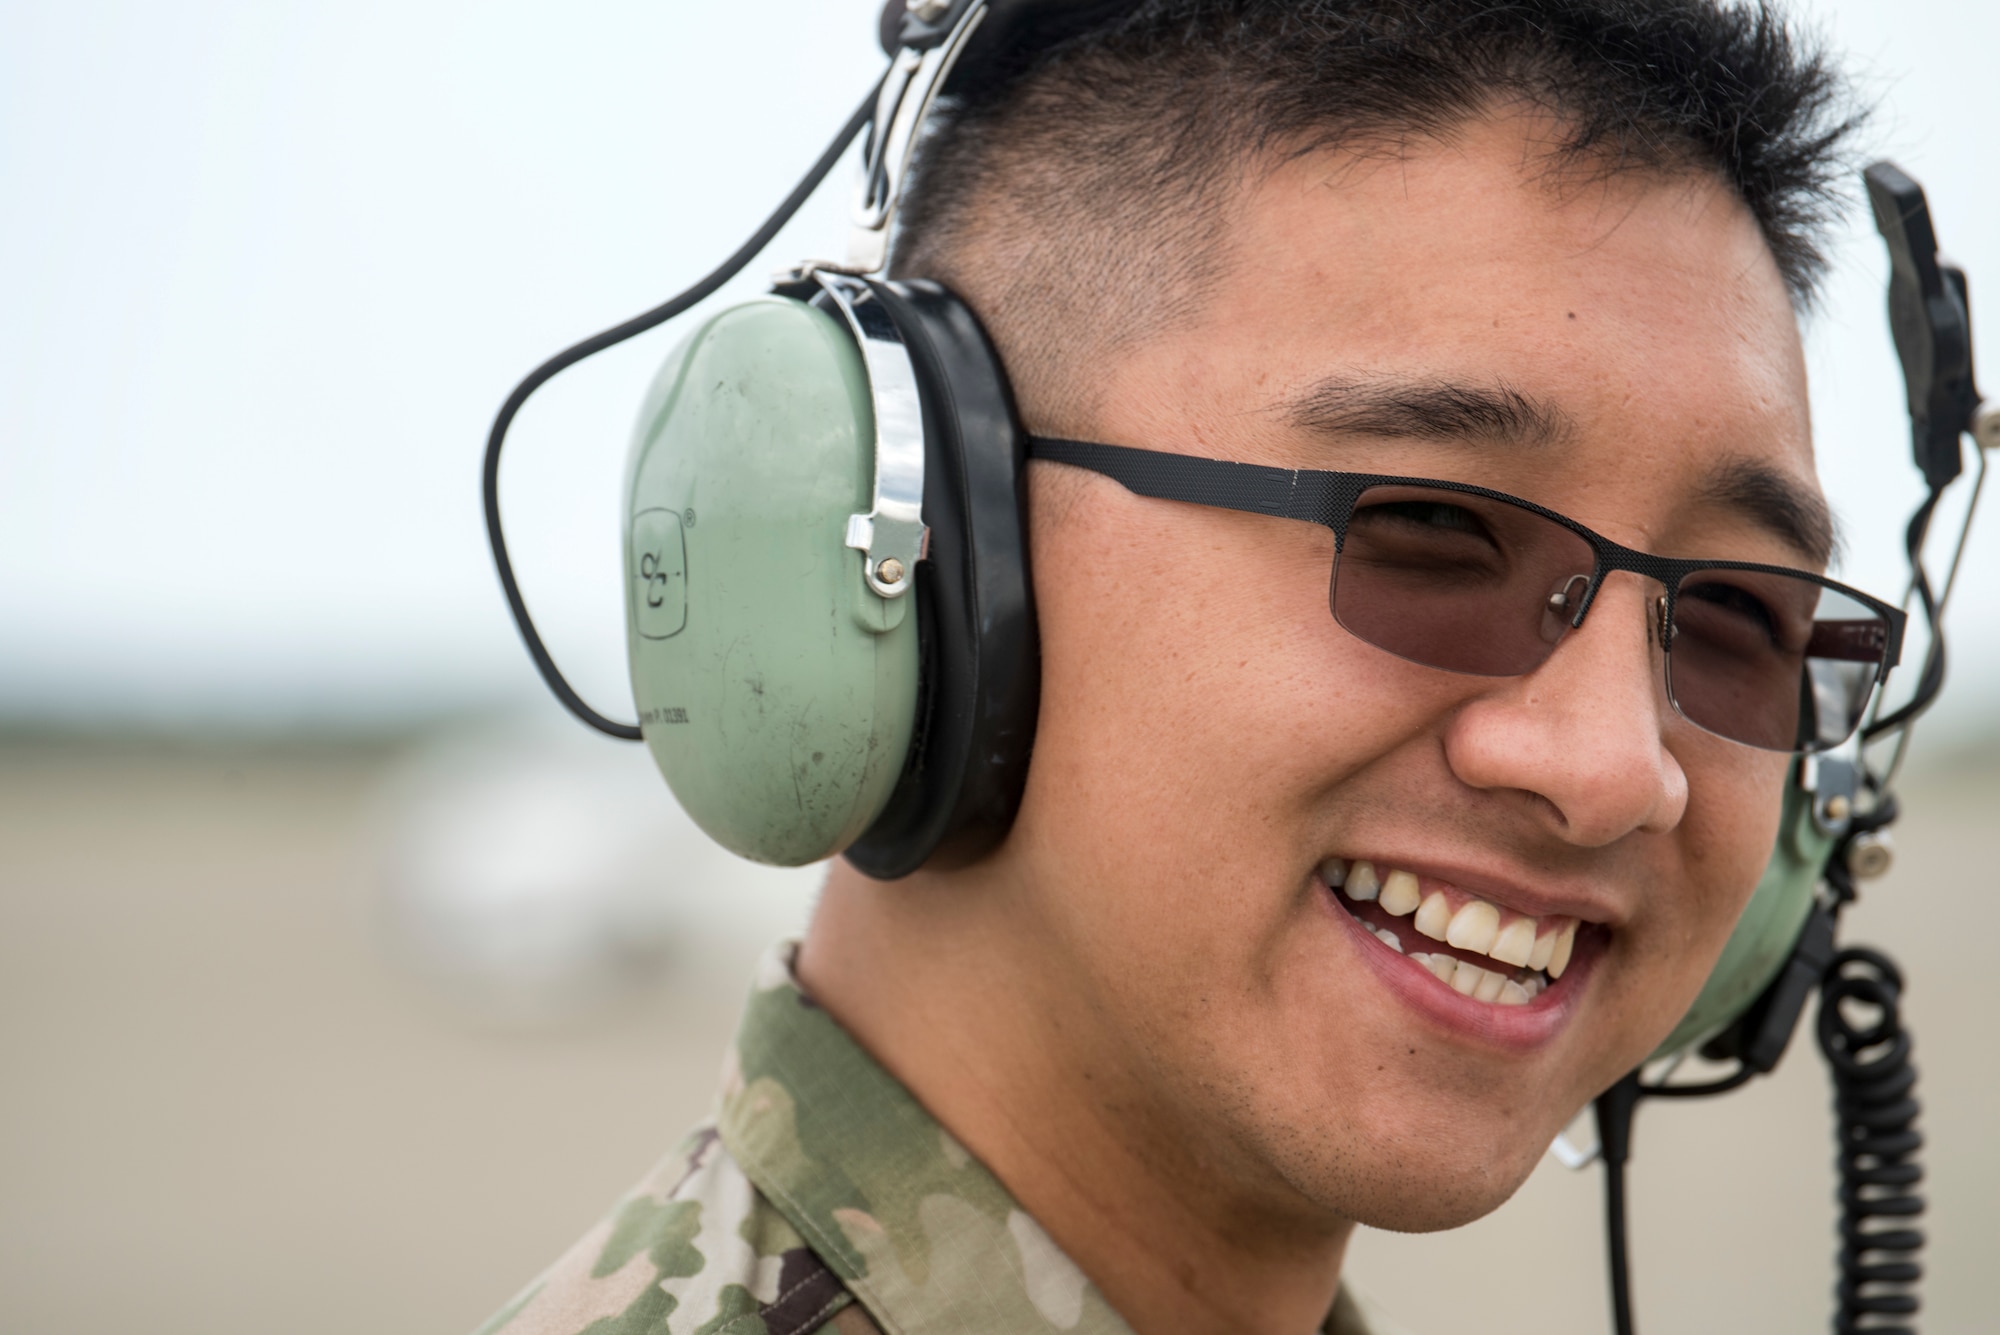 U.S. Air Force Senior Airman Peter Nguyen, a 13th Aircraft Maintenance Unit F-16 Fighting Falcon assistant dedicated crew chief, smiles while marshalling an F-16 during an aviation training relocation at Komatsu Air Base, Japan, Oct. 3, 2019. Capt. Phillip McCoy, a 13th Fighter Squadron F-16 pilot and Komatsu ATR detachment commander, described the ATR participants as hard working, consistent and dedicated to the mission of executing bilateral training sorties regardless of unexpected changes, such as inclement weather experienced during the week-long exercise. The 13th AMU and its Airmen are assigned to Misawa AB. (U.S. Air Force photo by Senior Airman Collette Brooks)